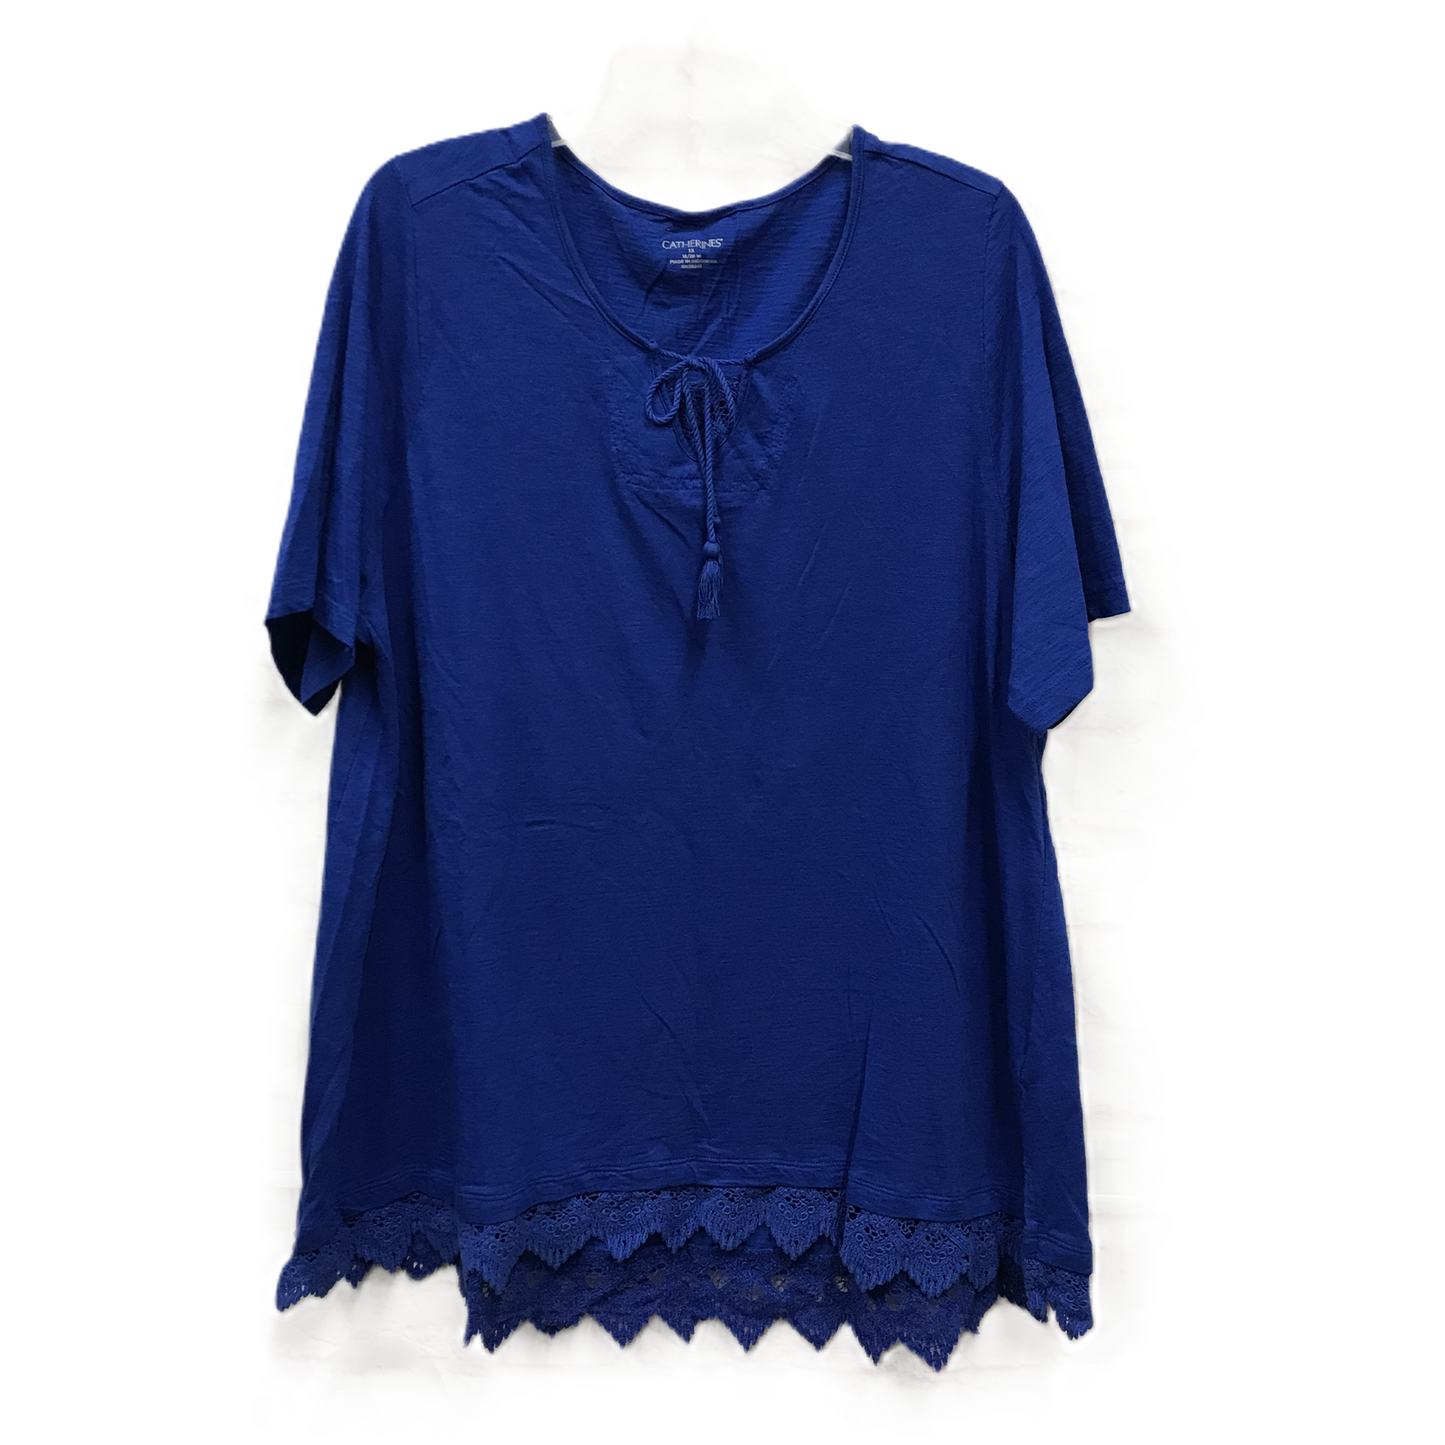 Blue Top Short Sleeve By Catherines, Size: 1x